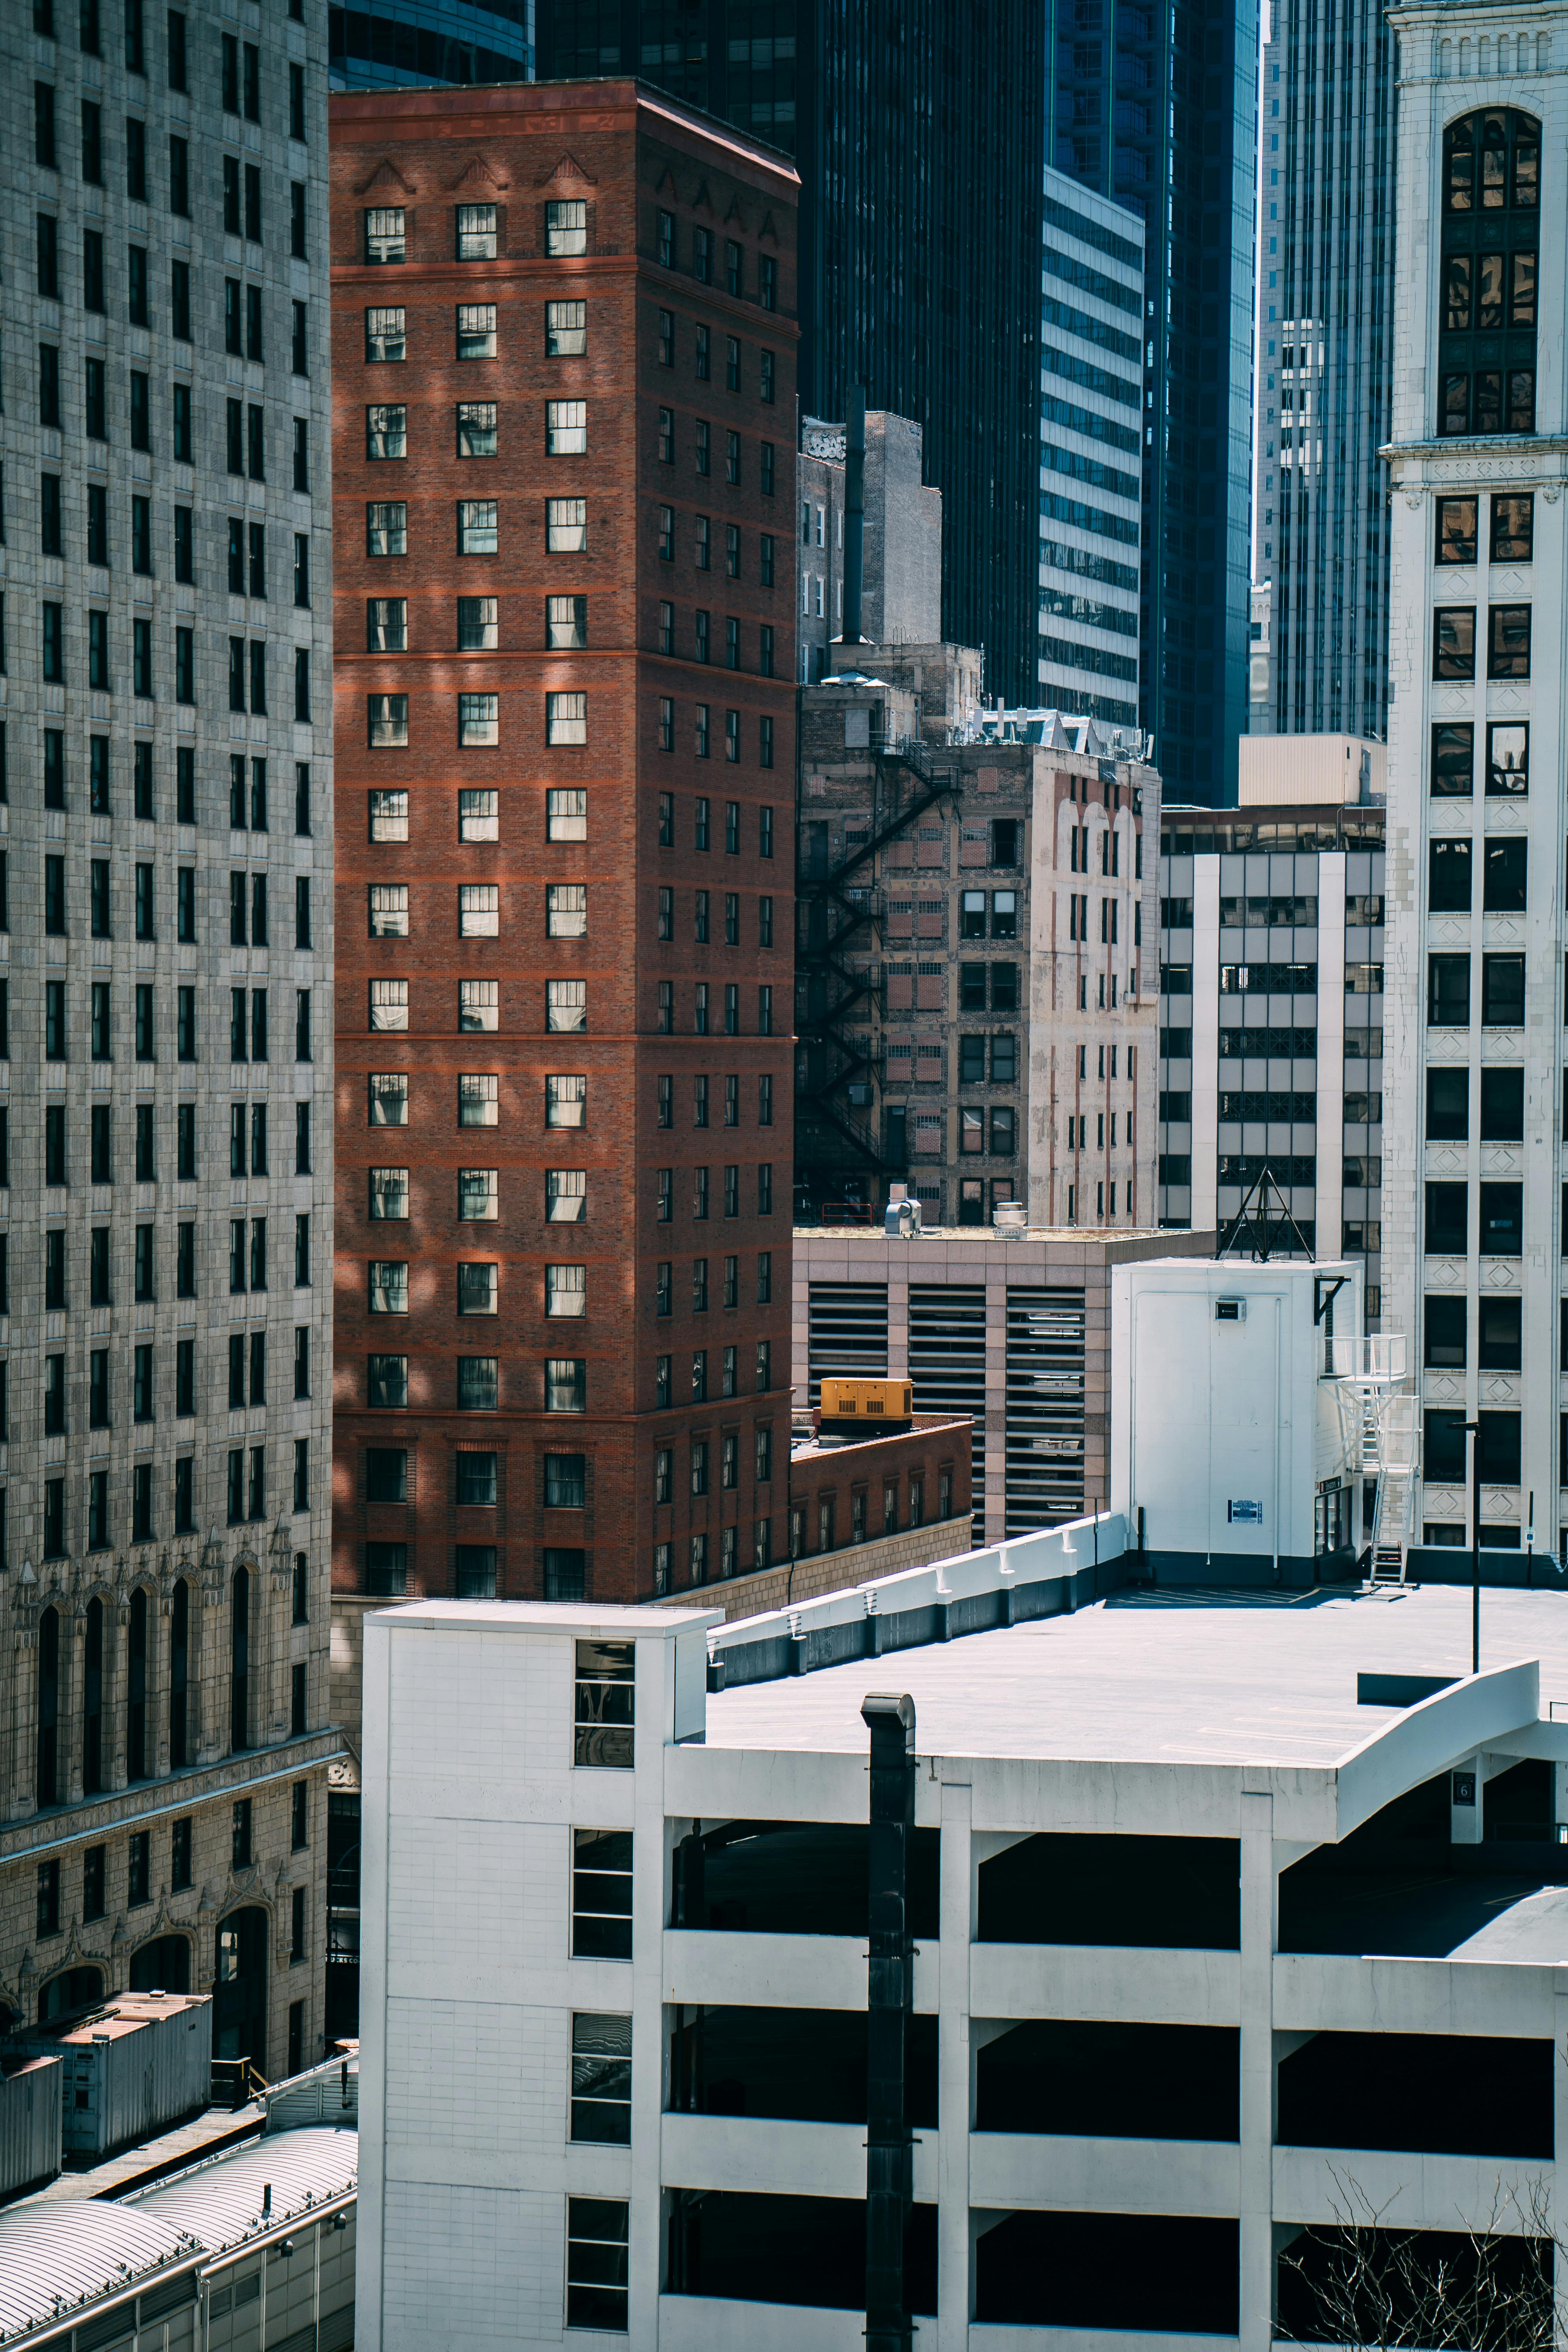 Rooftop Photos, Download The BEST Free Rooftop Stock Photos & HD Images